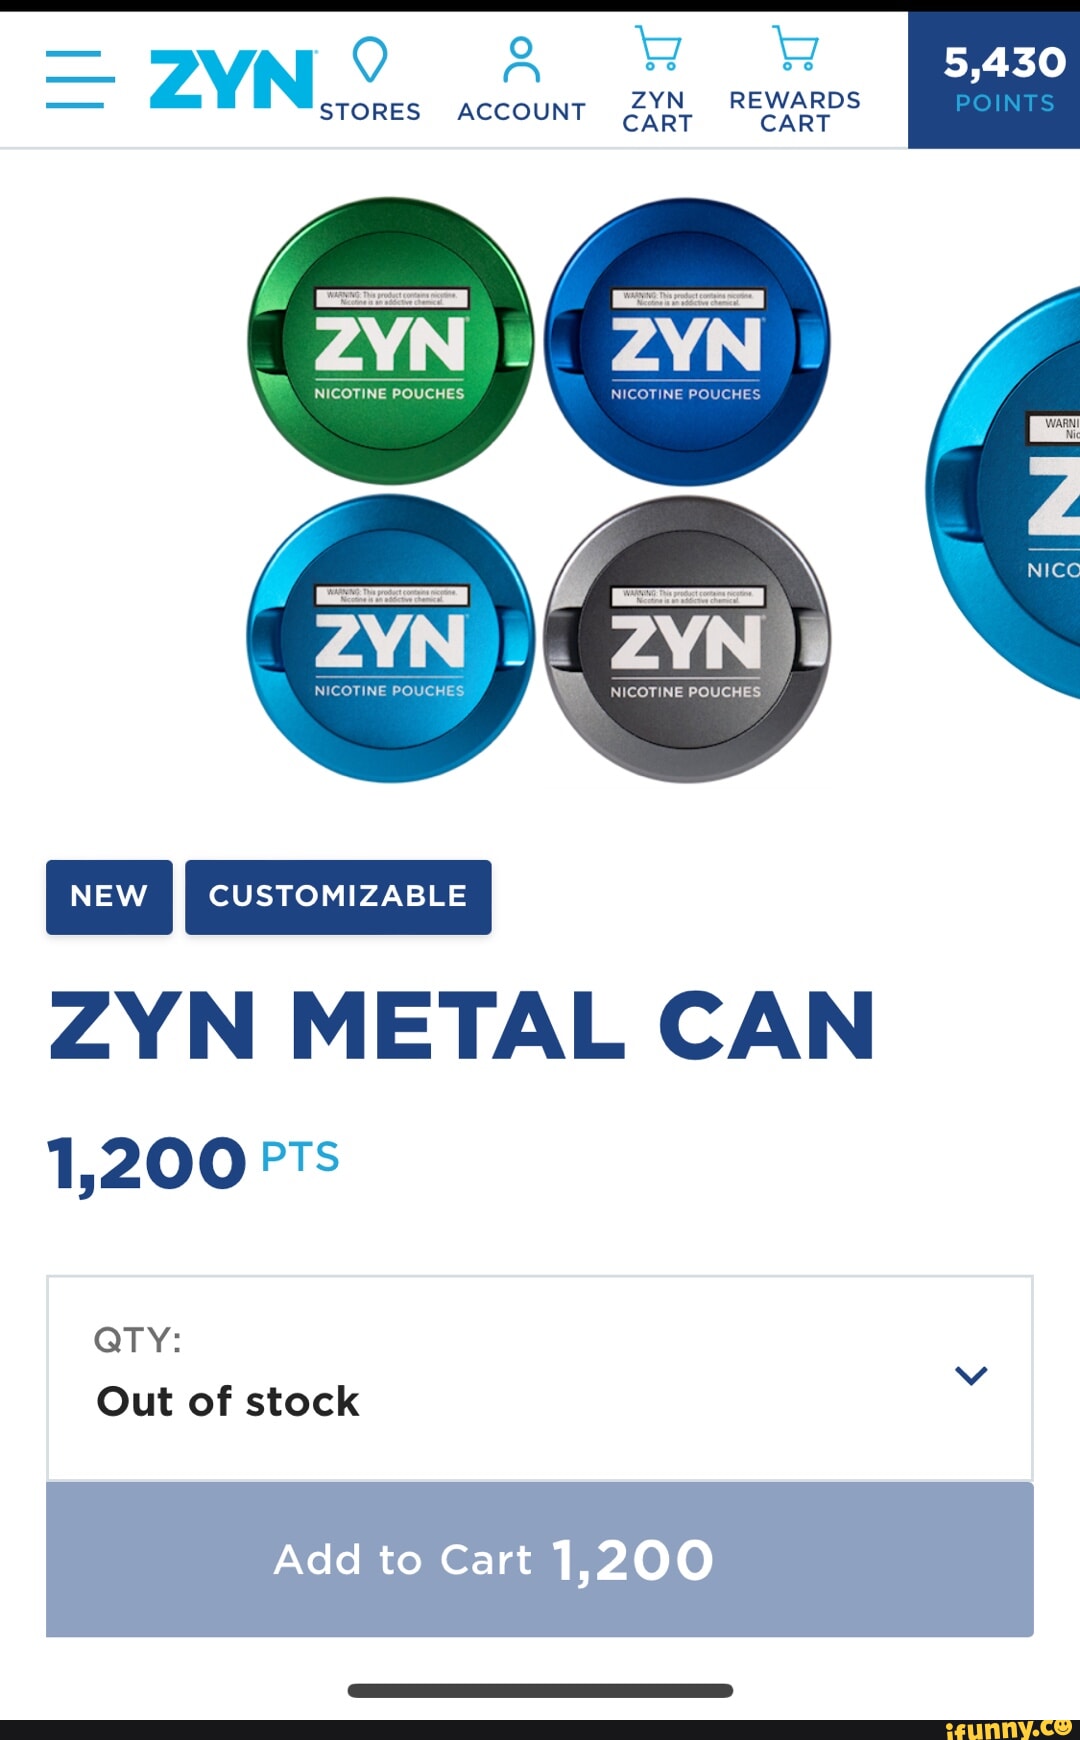 Ni ZYN REWARDS POINTS 5,430 STORES ACCOUNT Gapt CART NICOTINE POUCHES  POUCHES ZYN METAL CAN 1,200 P's QTY: Out of stock Add to Cart 1,200 -  iFunny Brazil